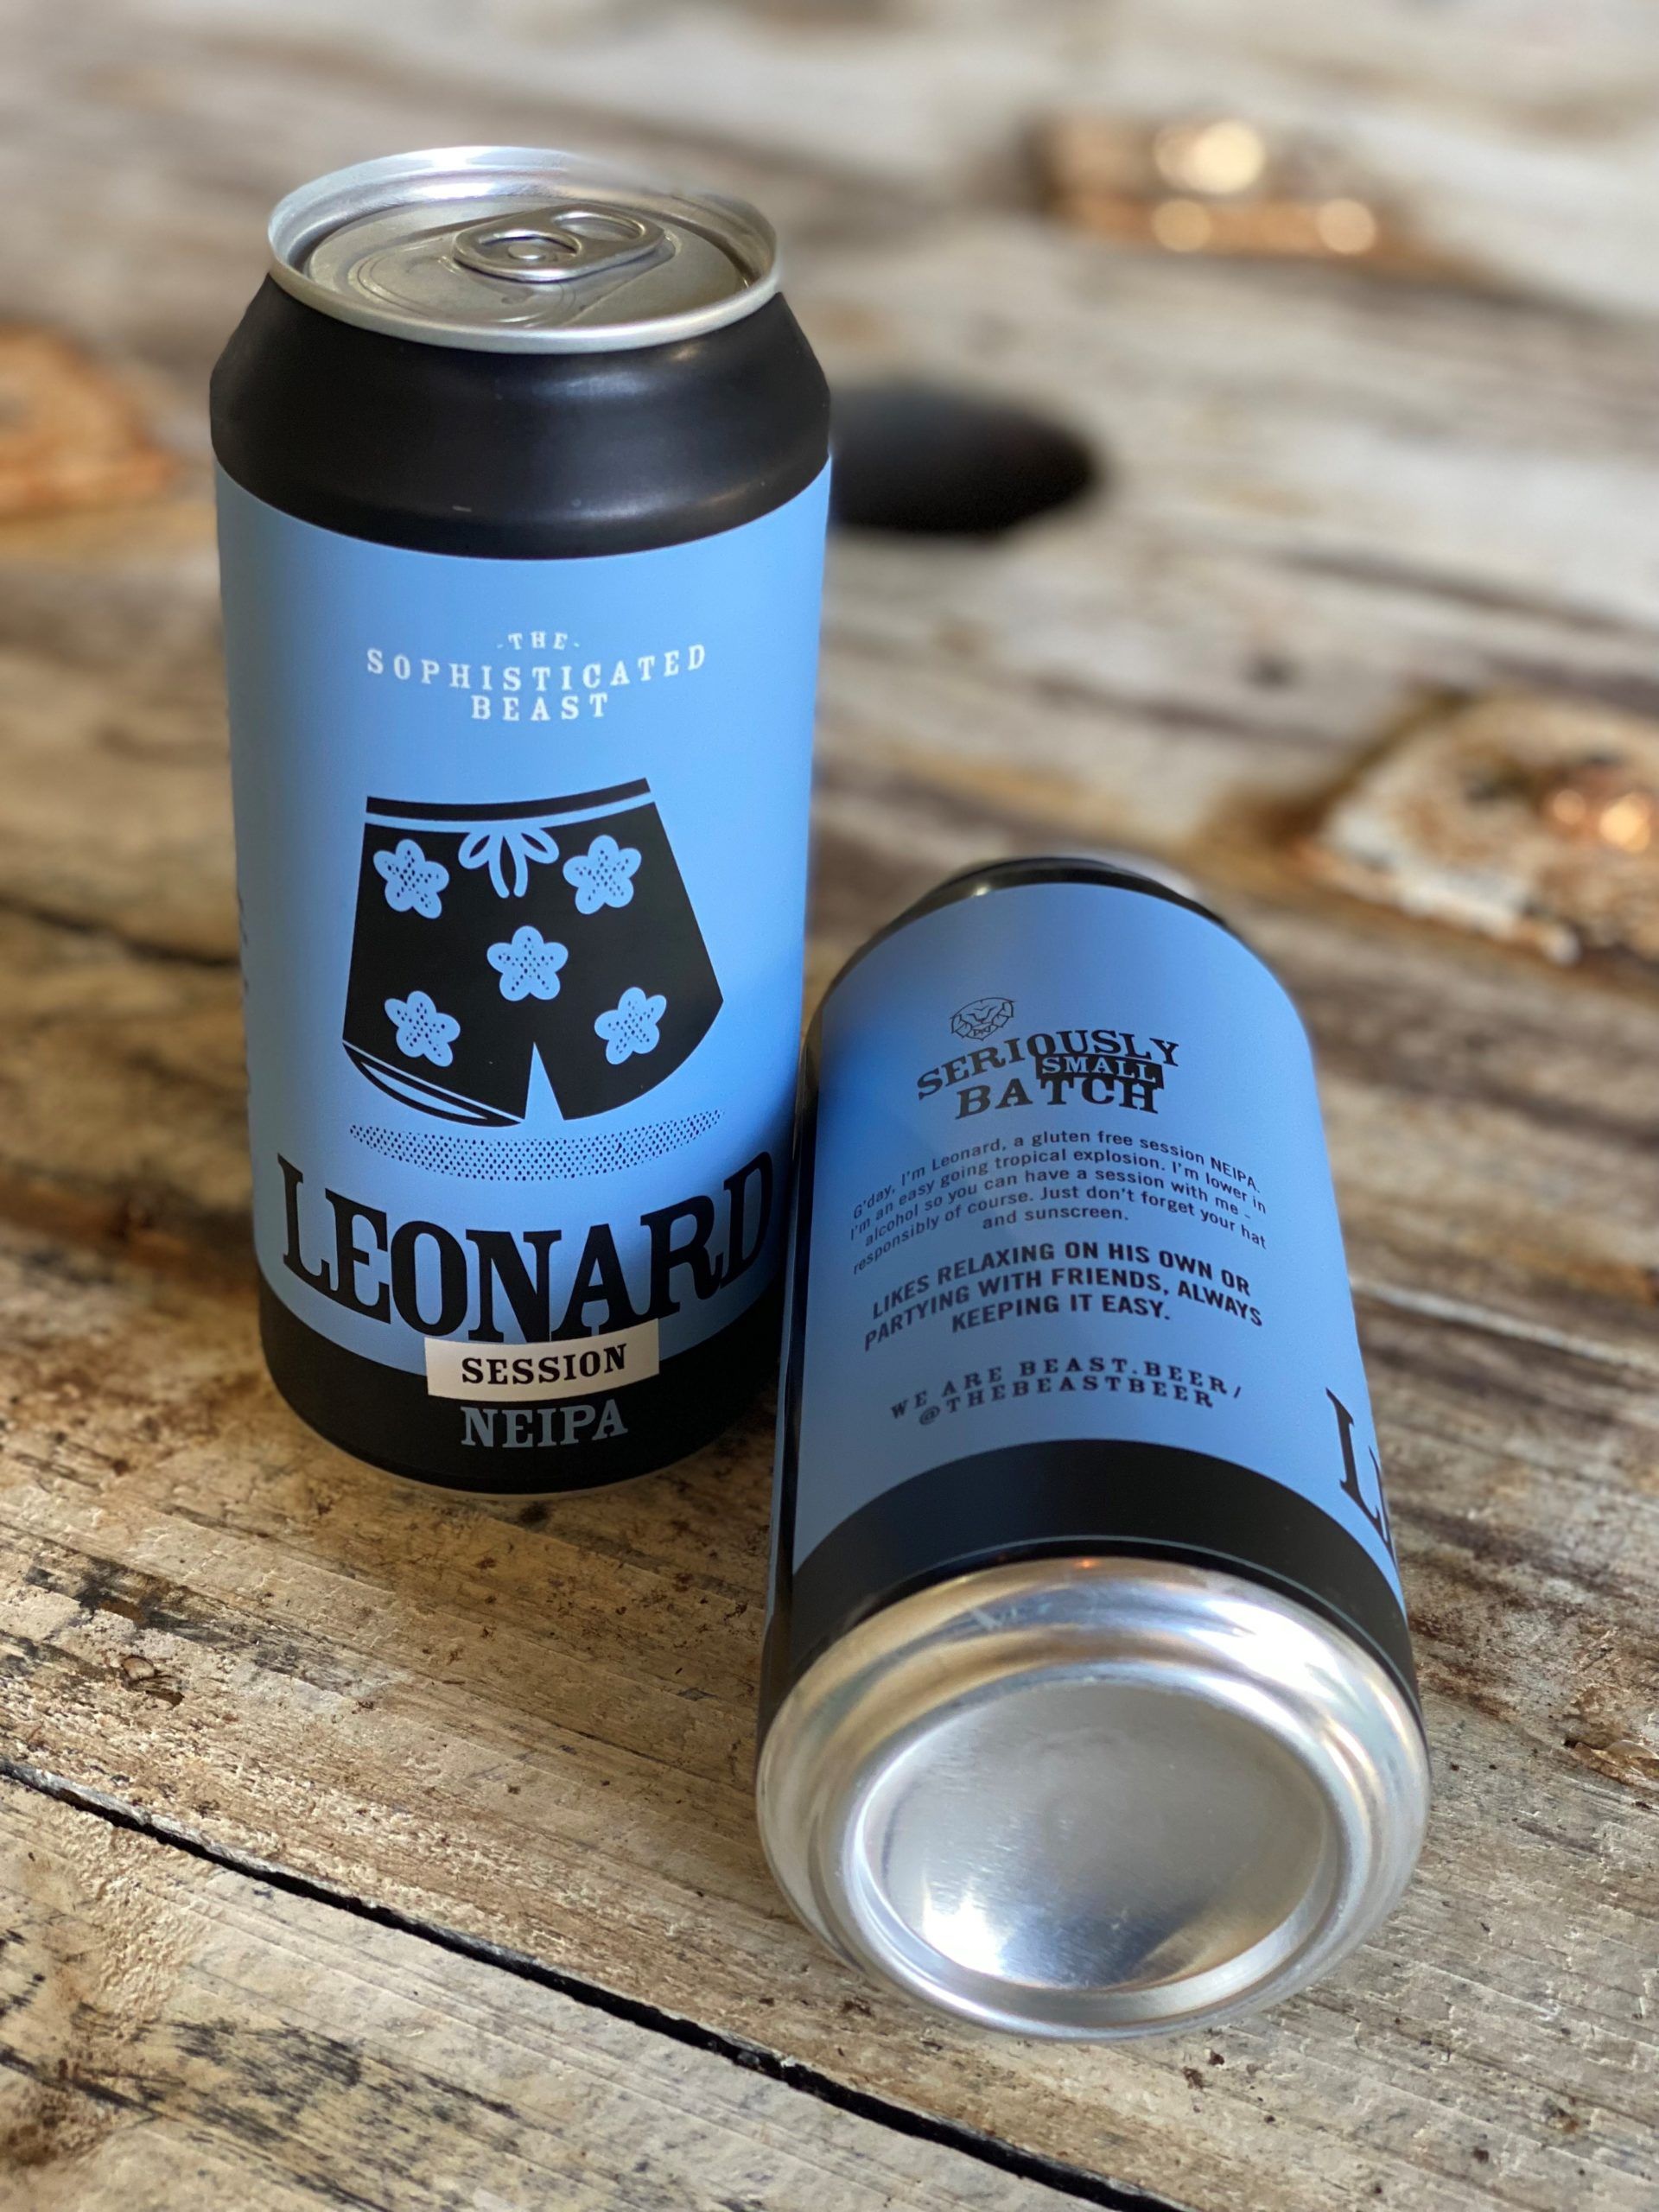 The Sophisticated Beast - Summer Beers, Leonard Session NEIPA